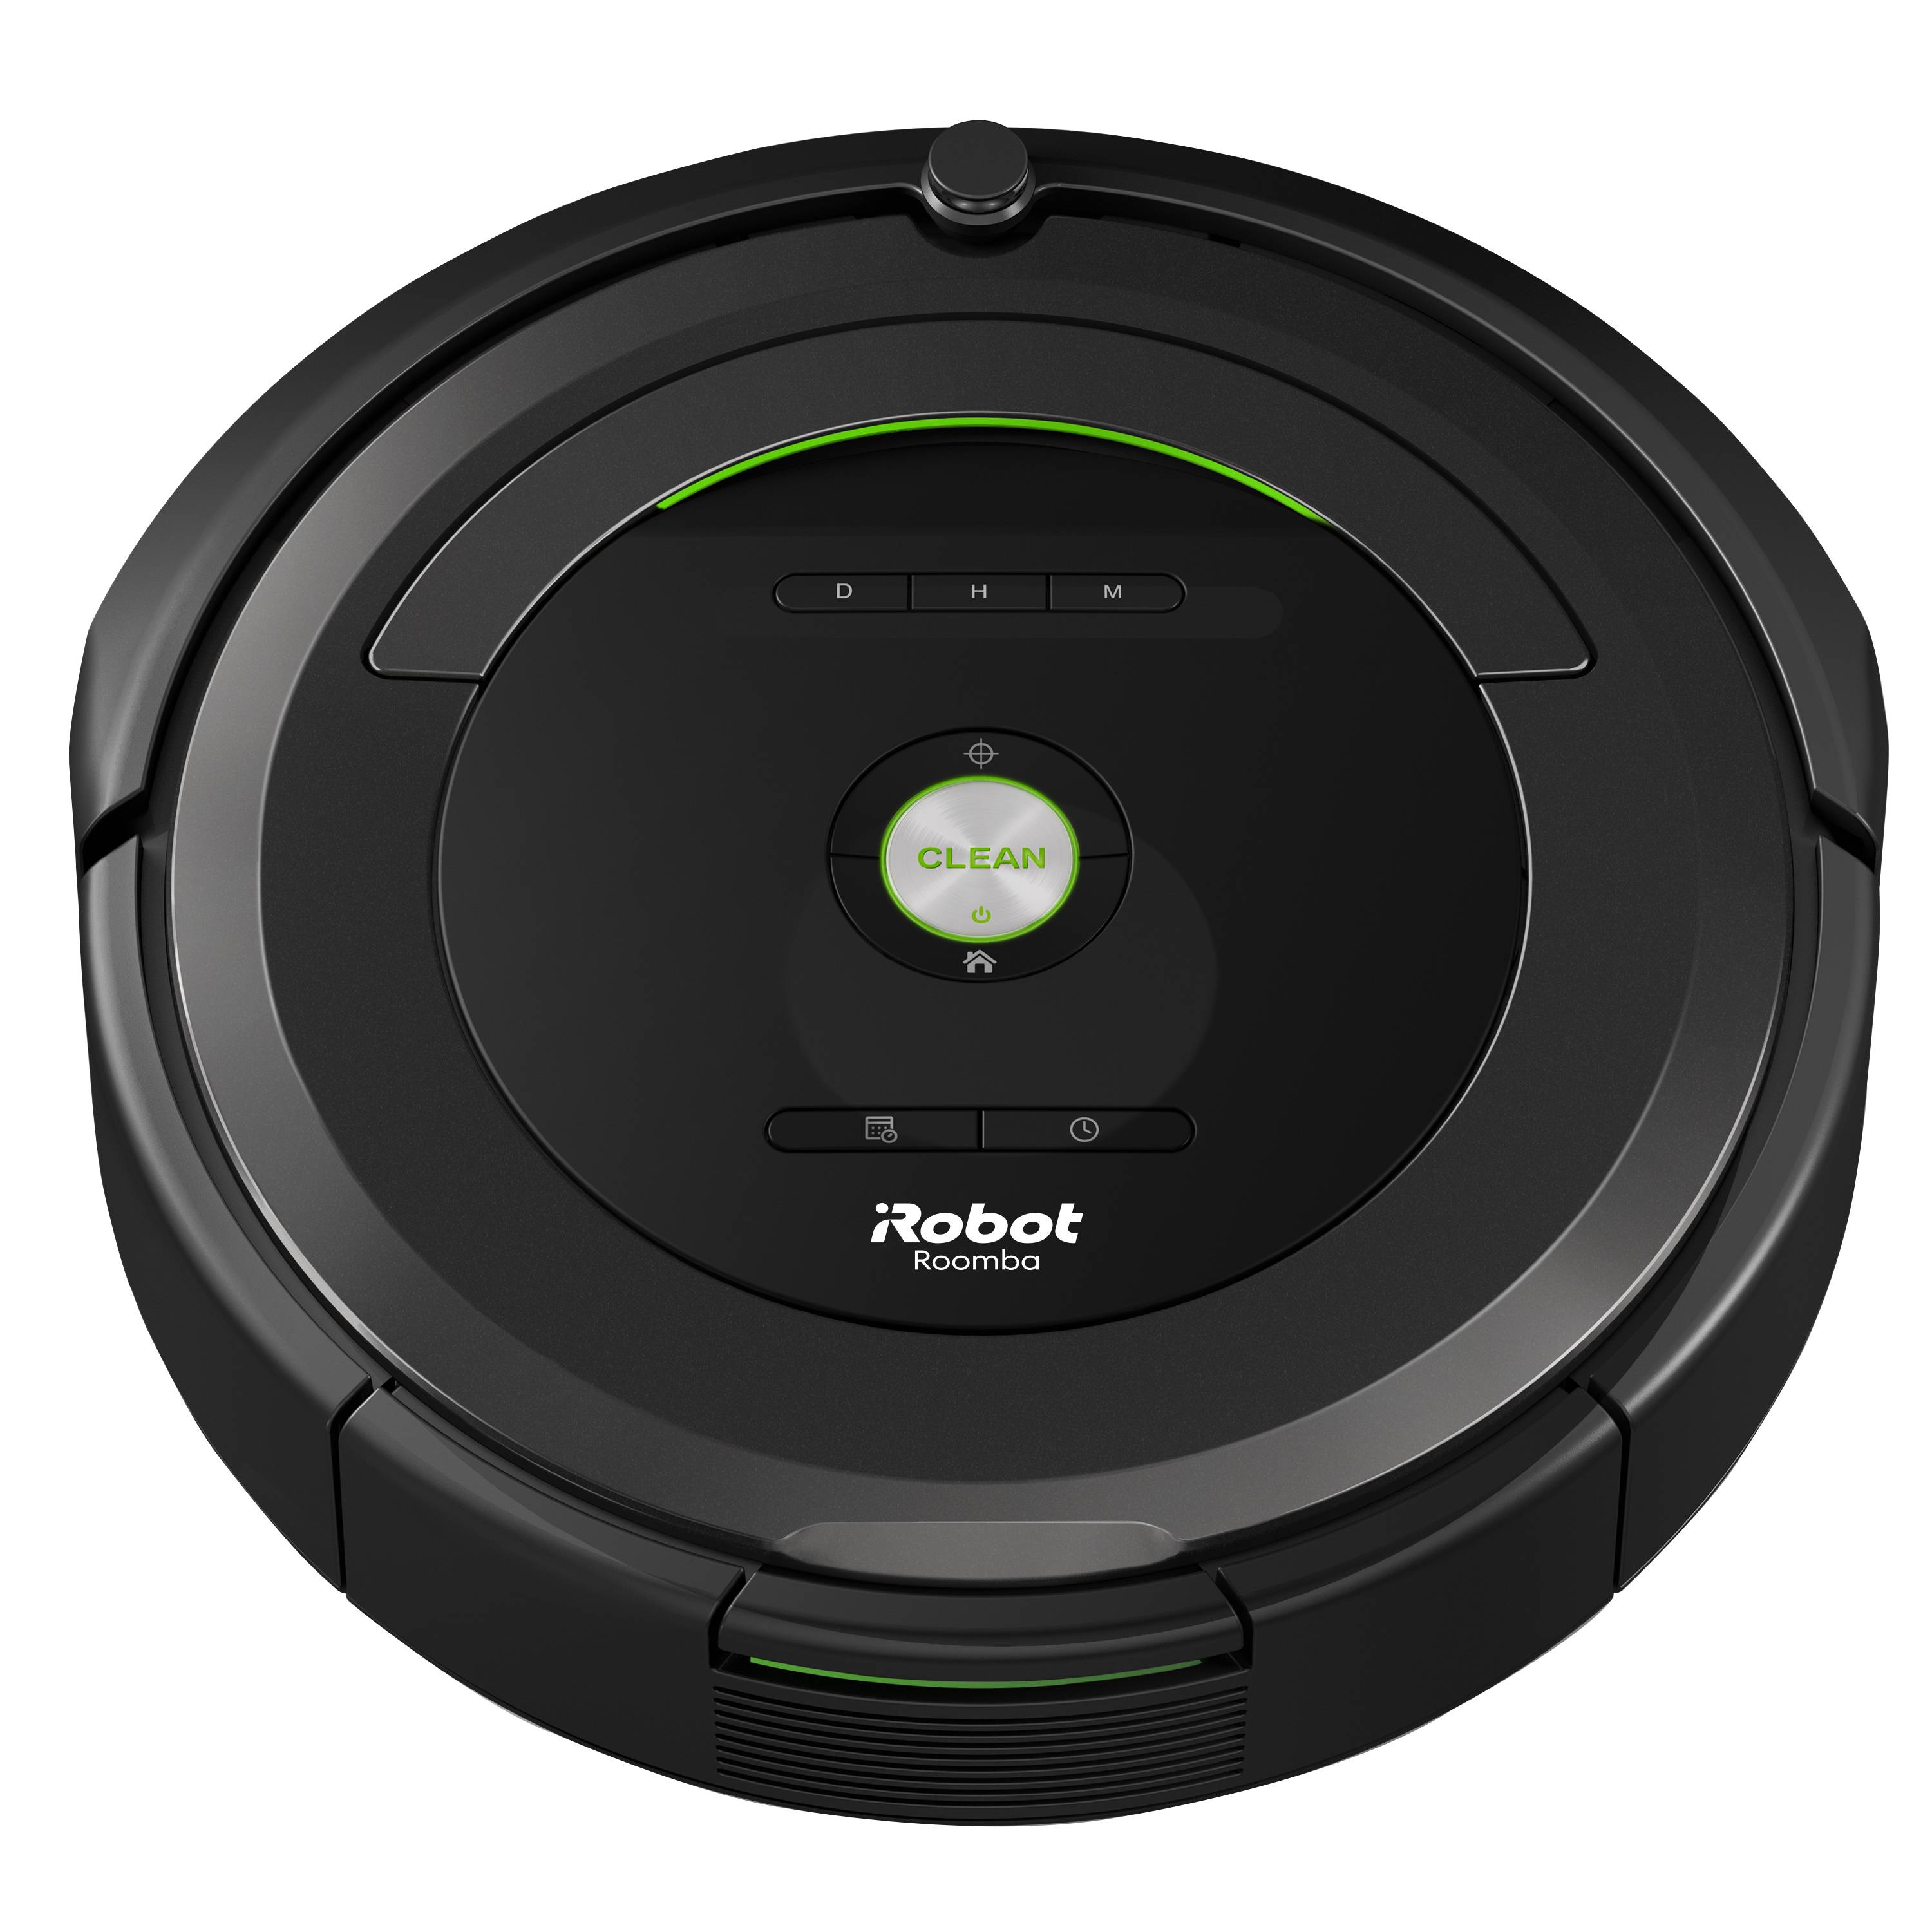 Roomba by iRobot 680 Robot Vacuum with Manufacturer’s Warranty